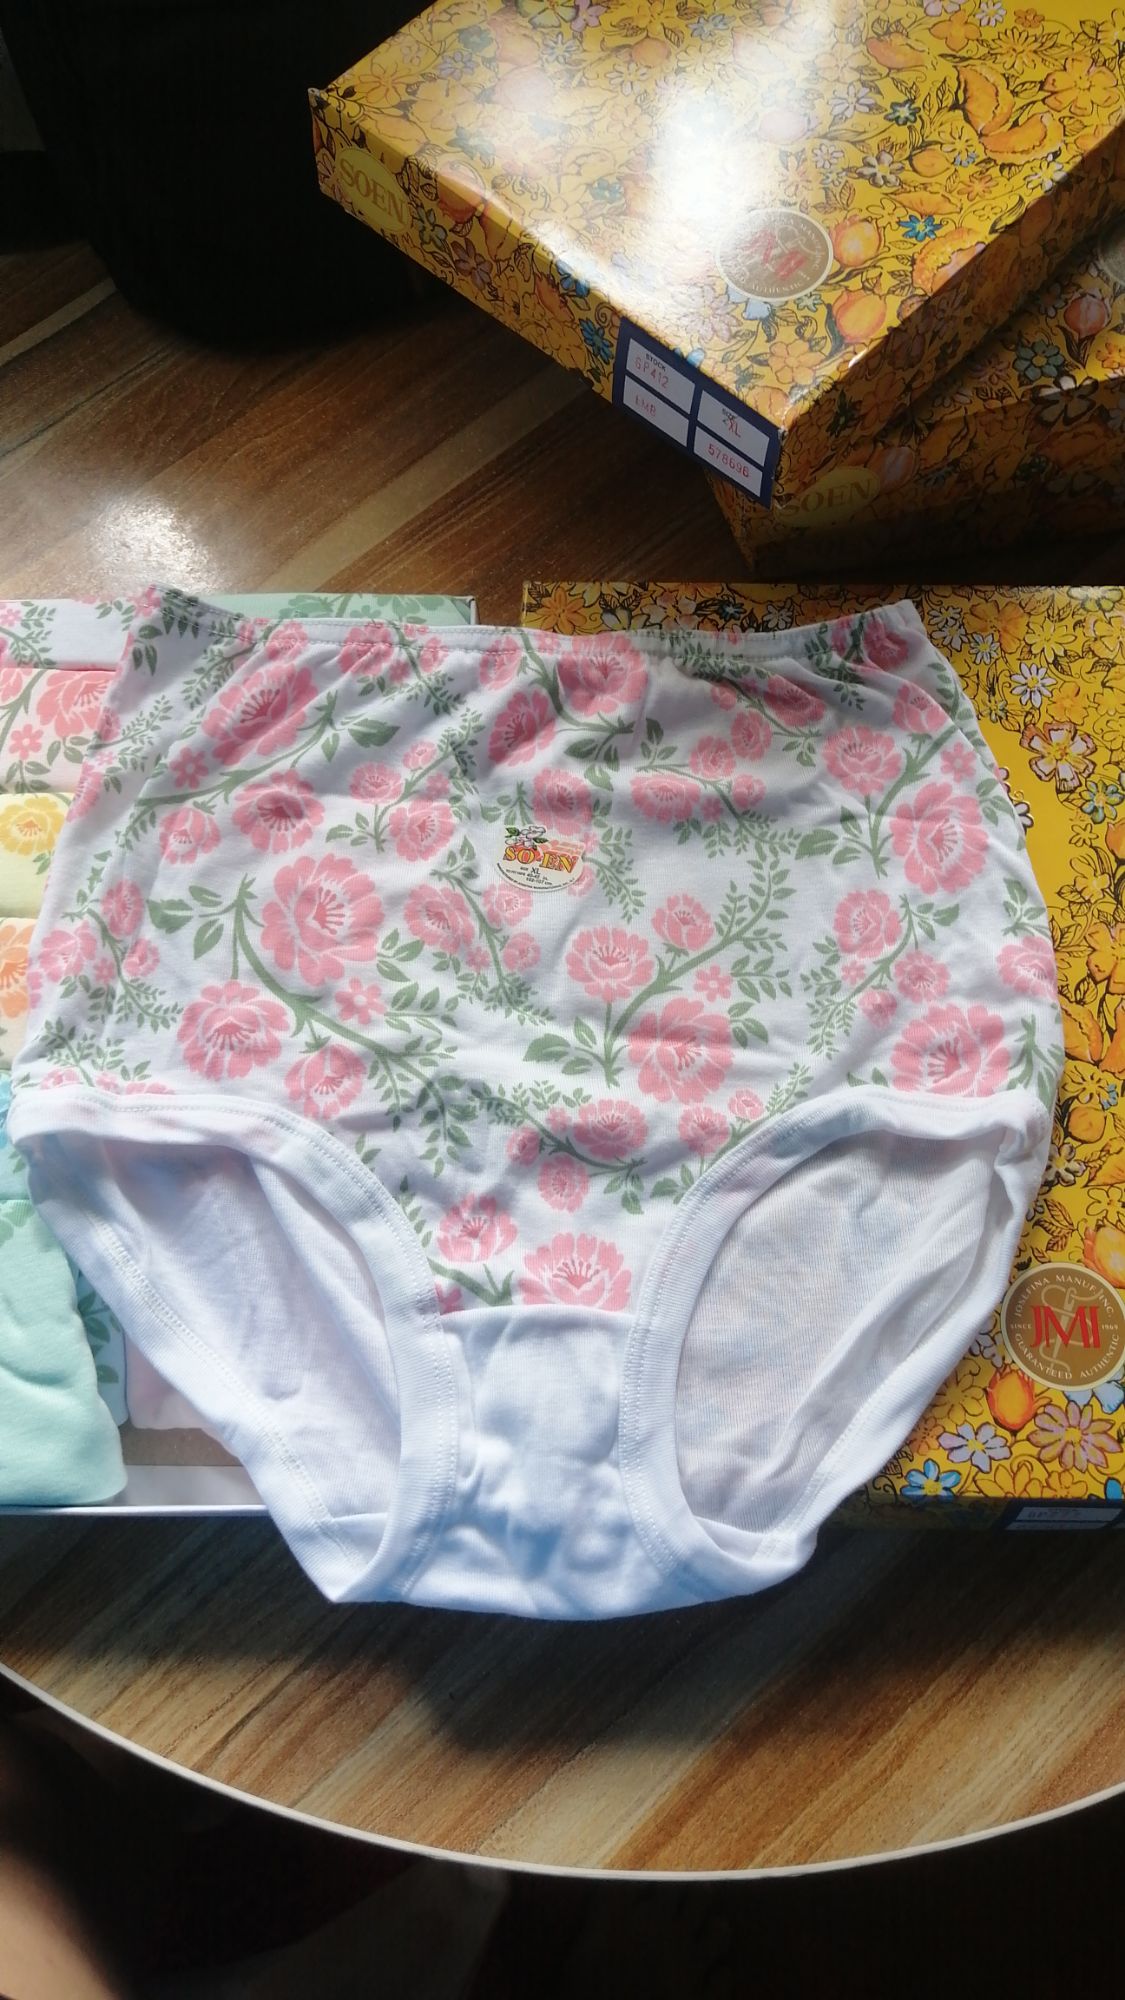 SO-EN FULL PANTY (GP) 100% ORIGINAL FOR MATERNITY AND GRANY 12PCS 1BOX  ASSORTED PRINT EMBROIDERED